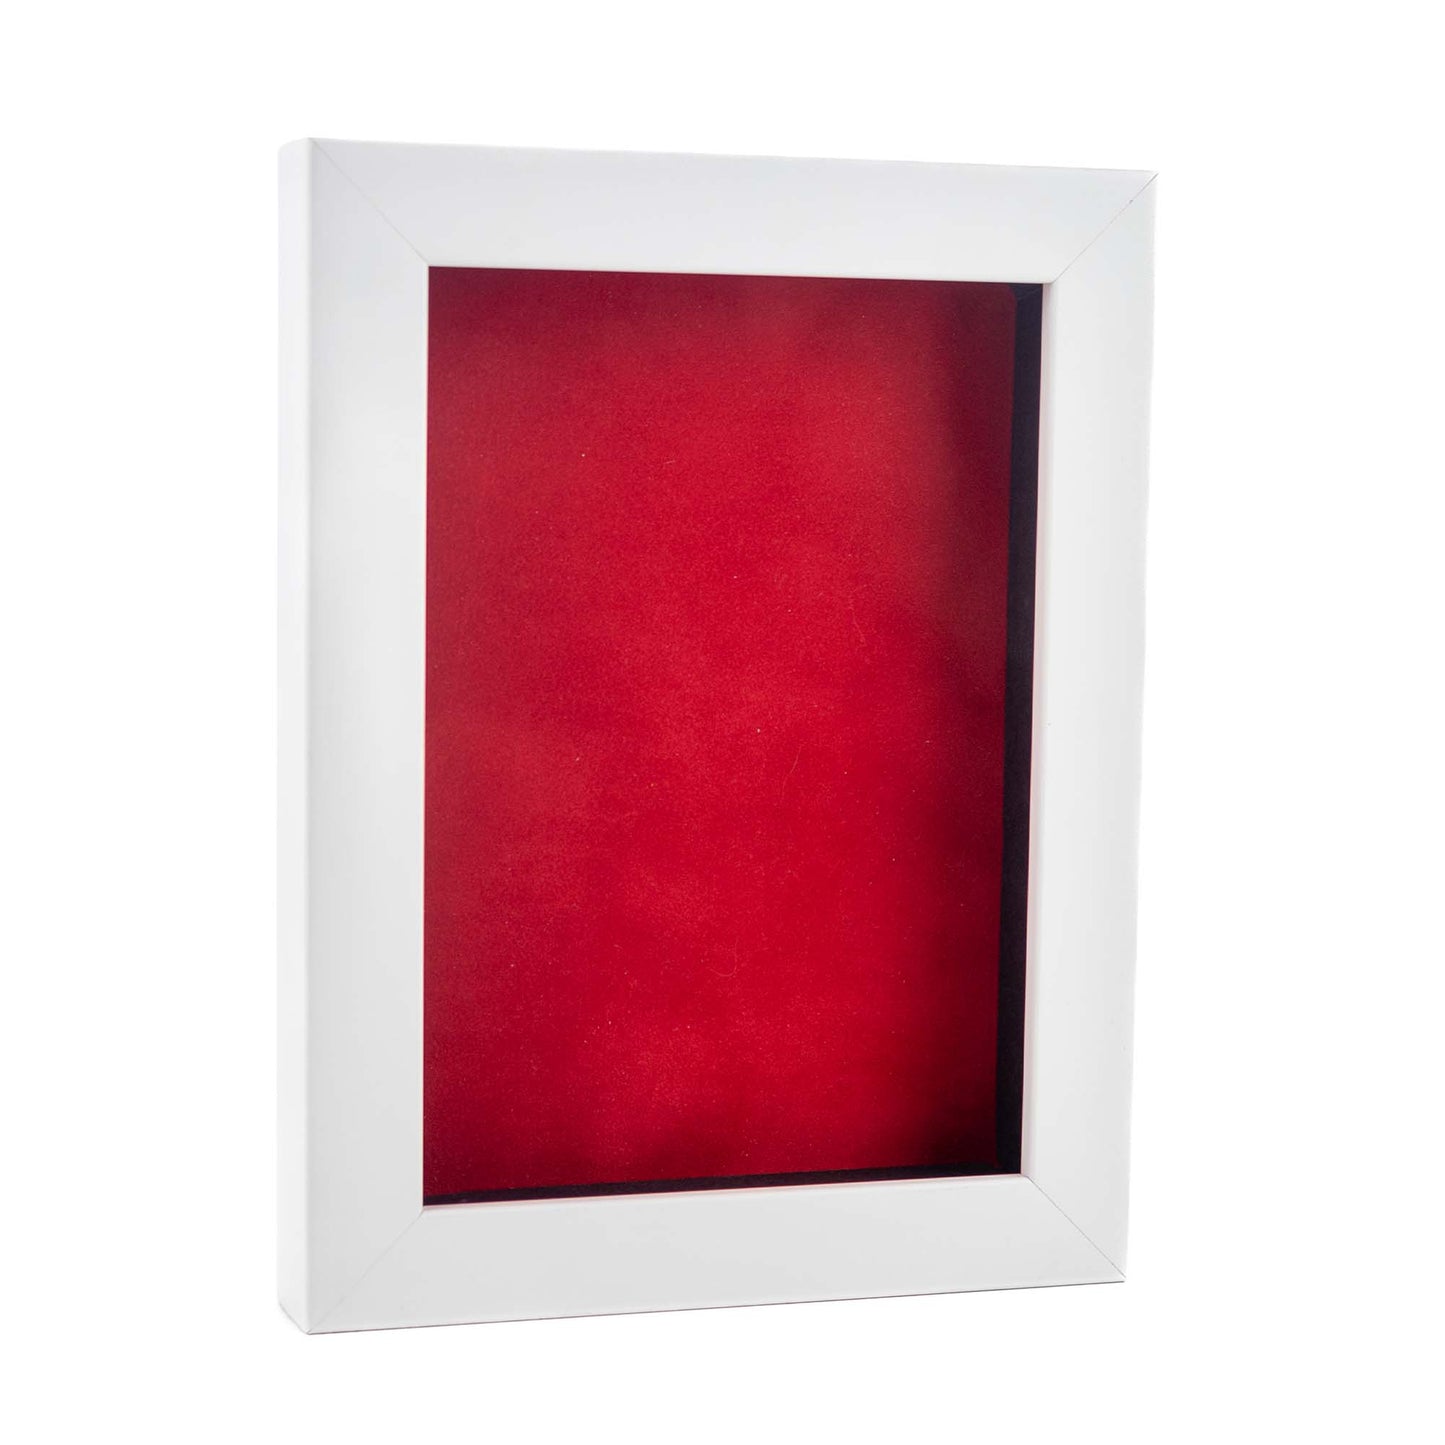 White Shadow Box Frame With Red Acid-Free Suede Backing